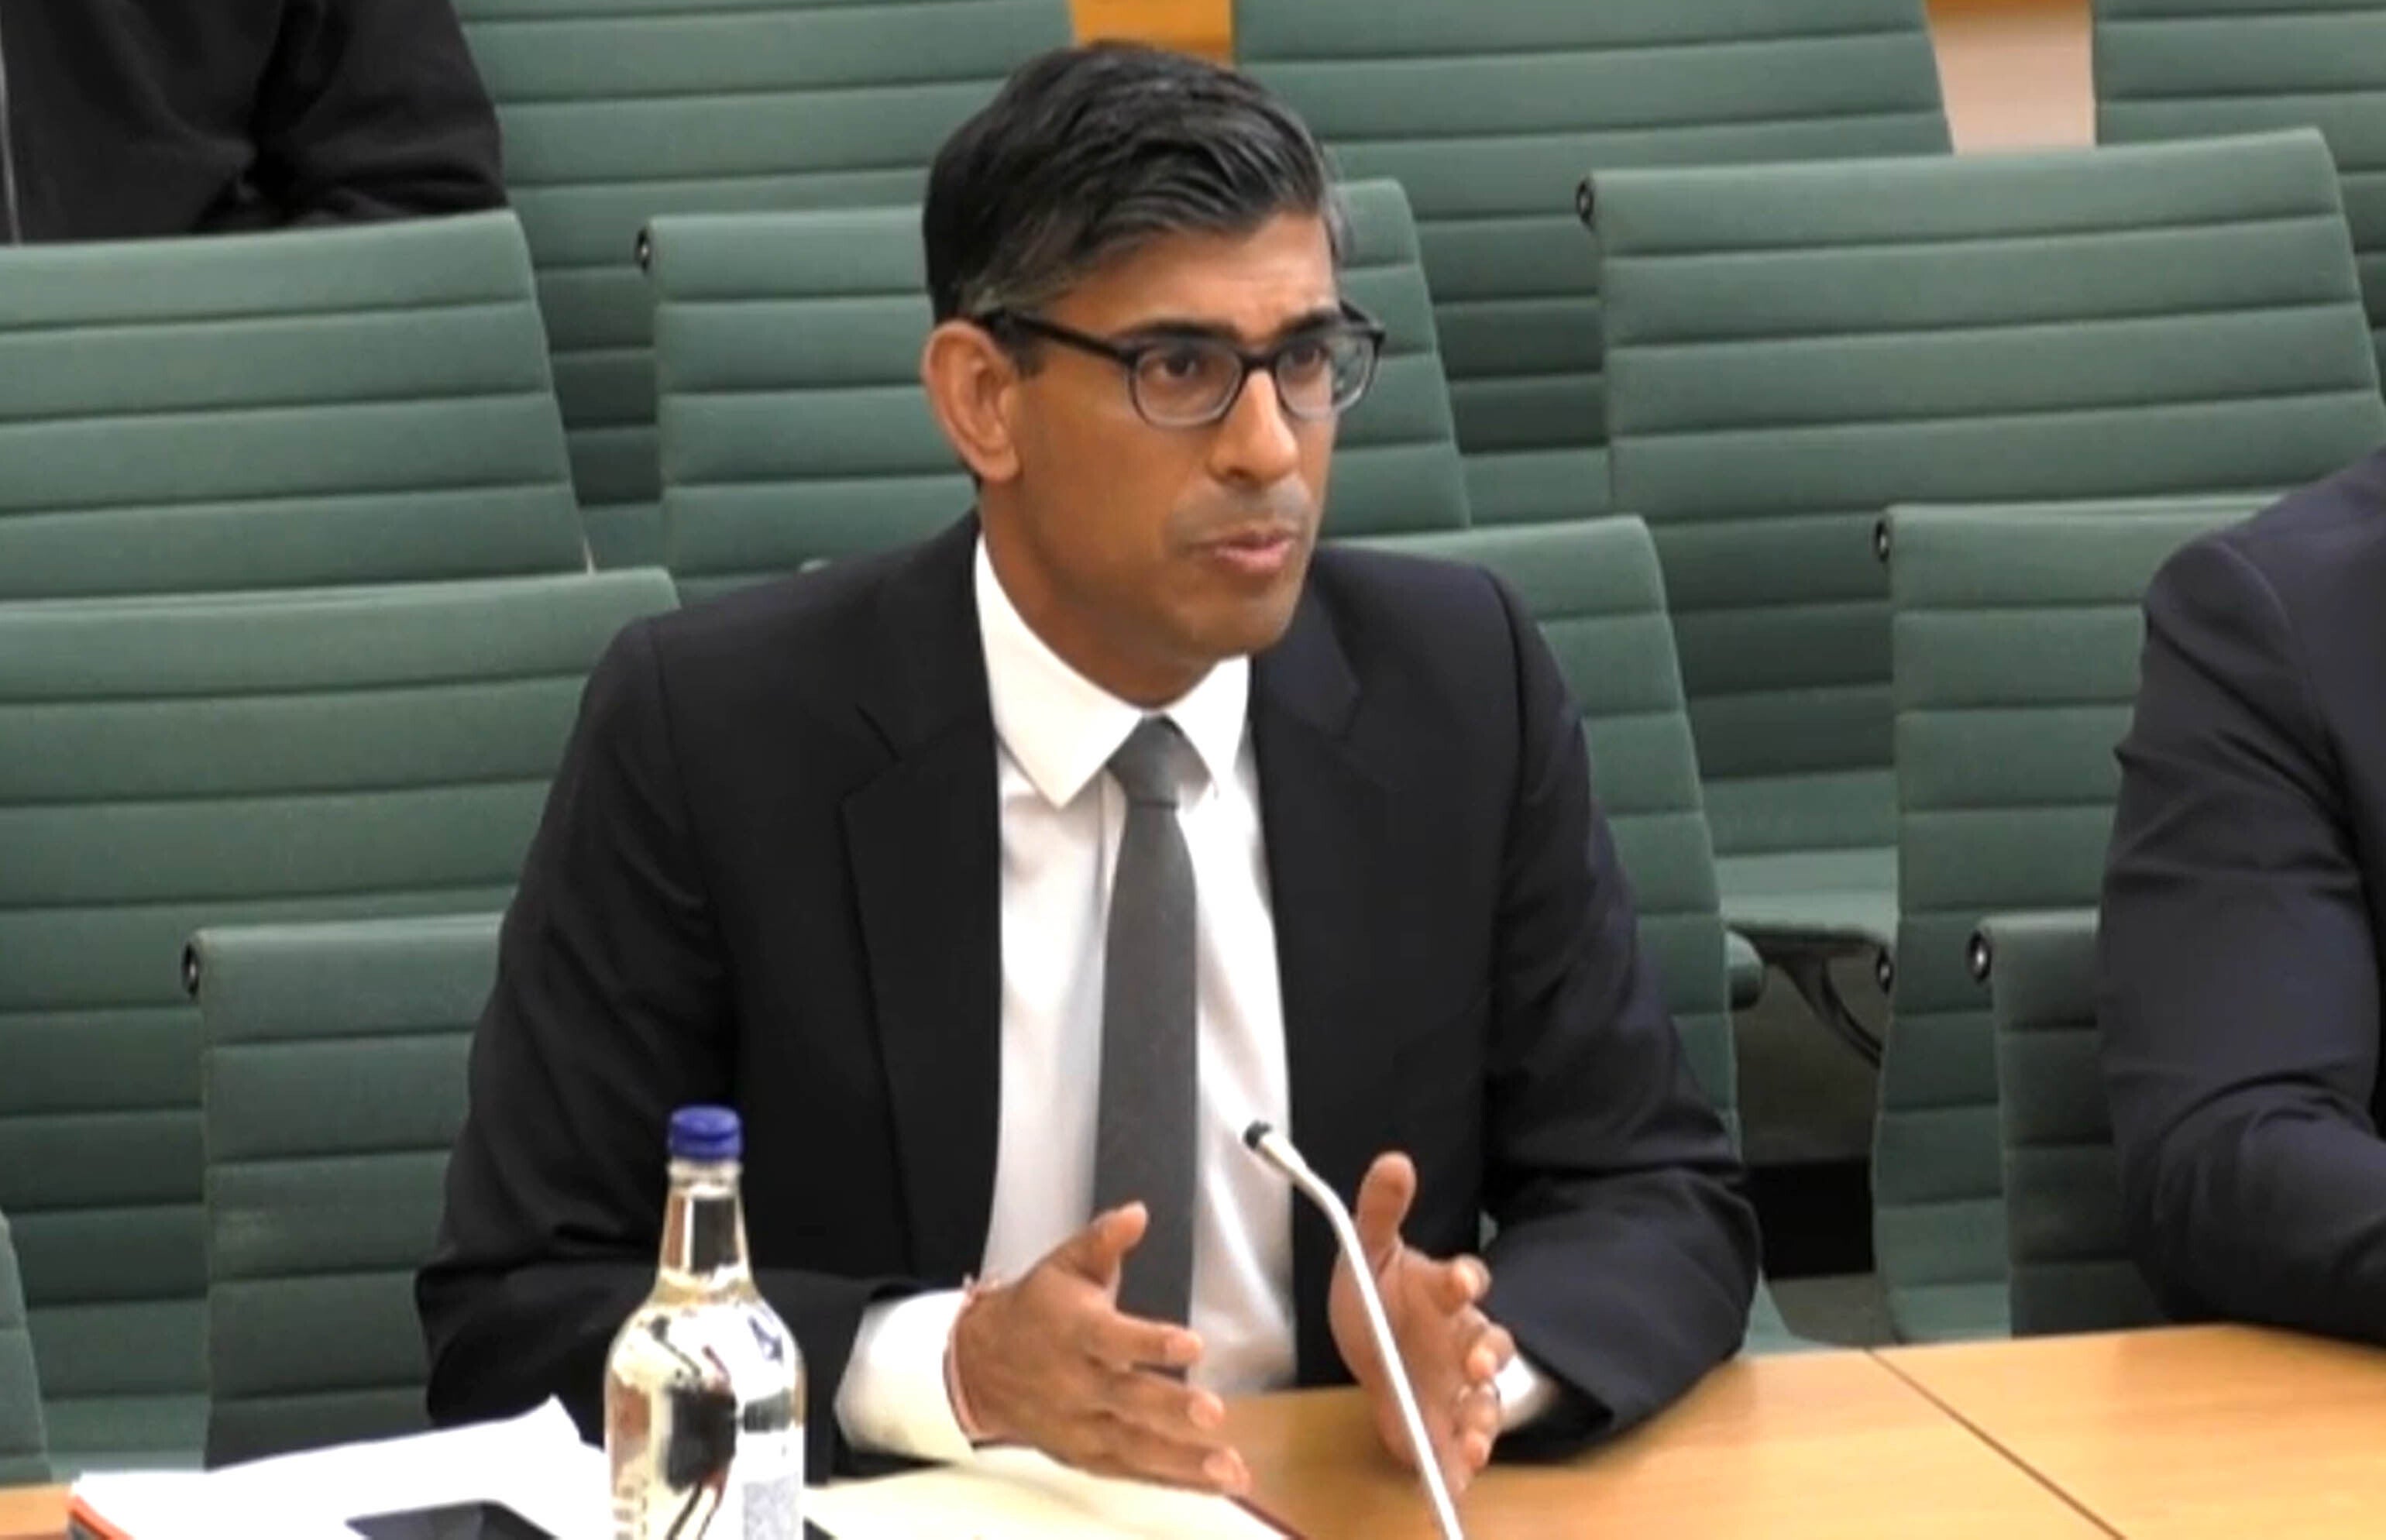 Rishi Sunak answered questions at a Treasury select committee hearing in the House of Commons